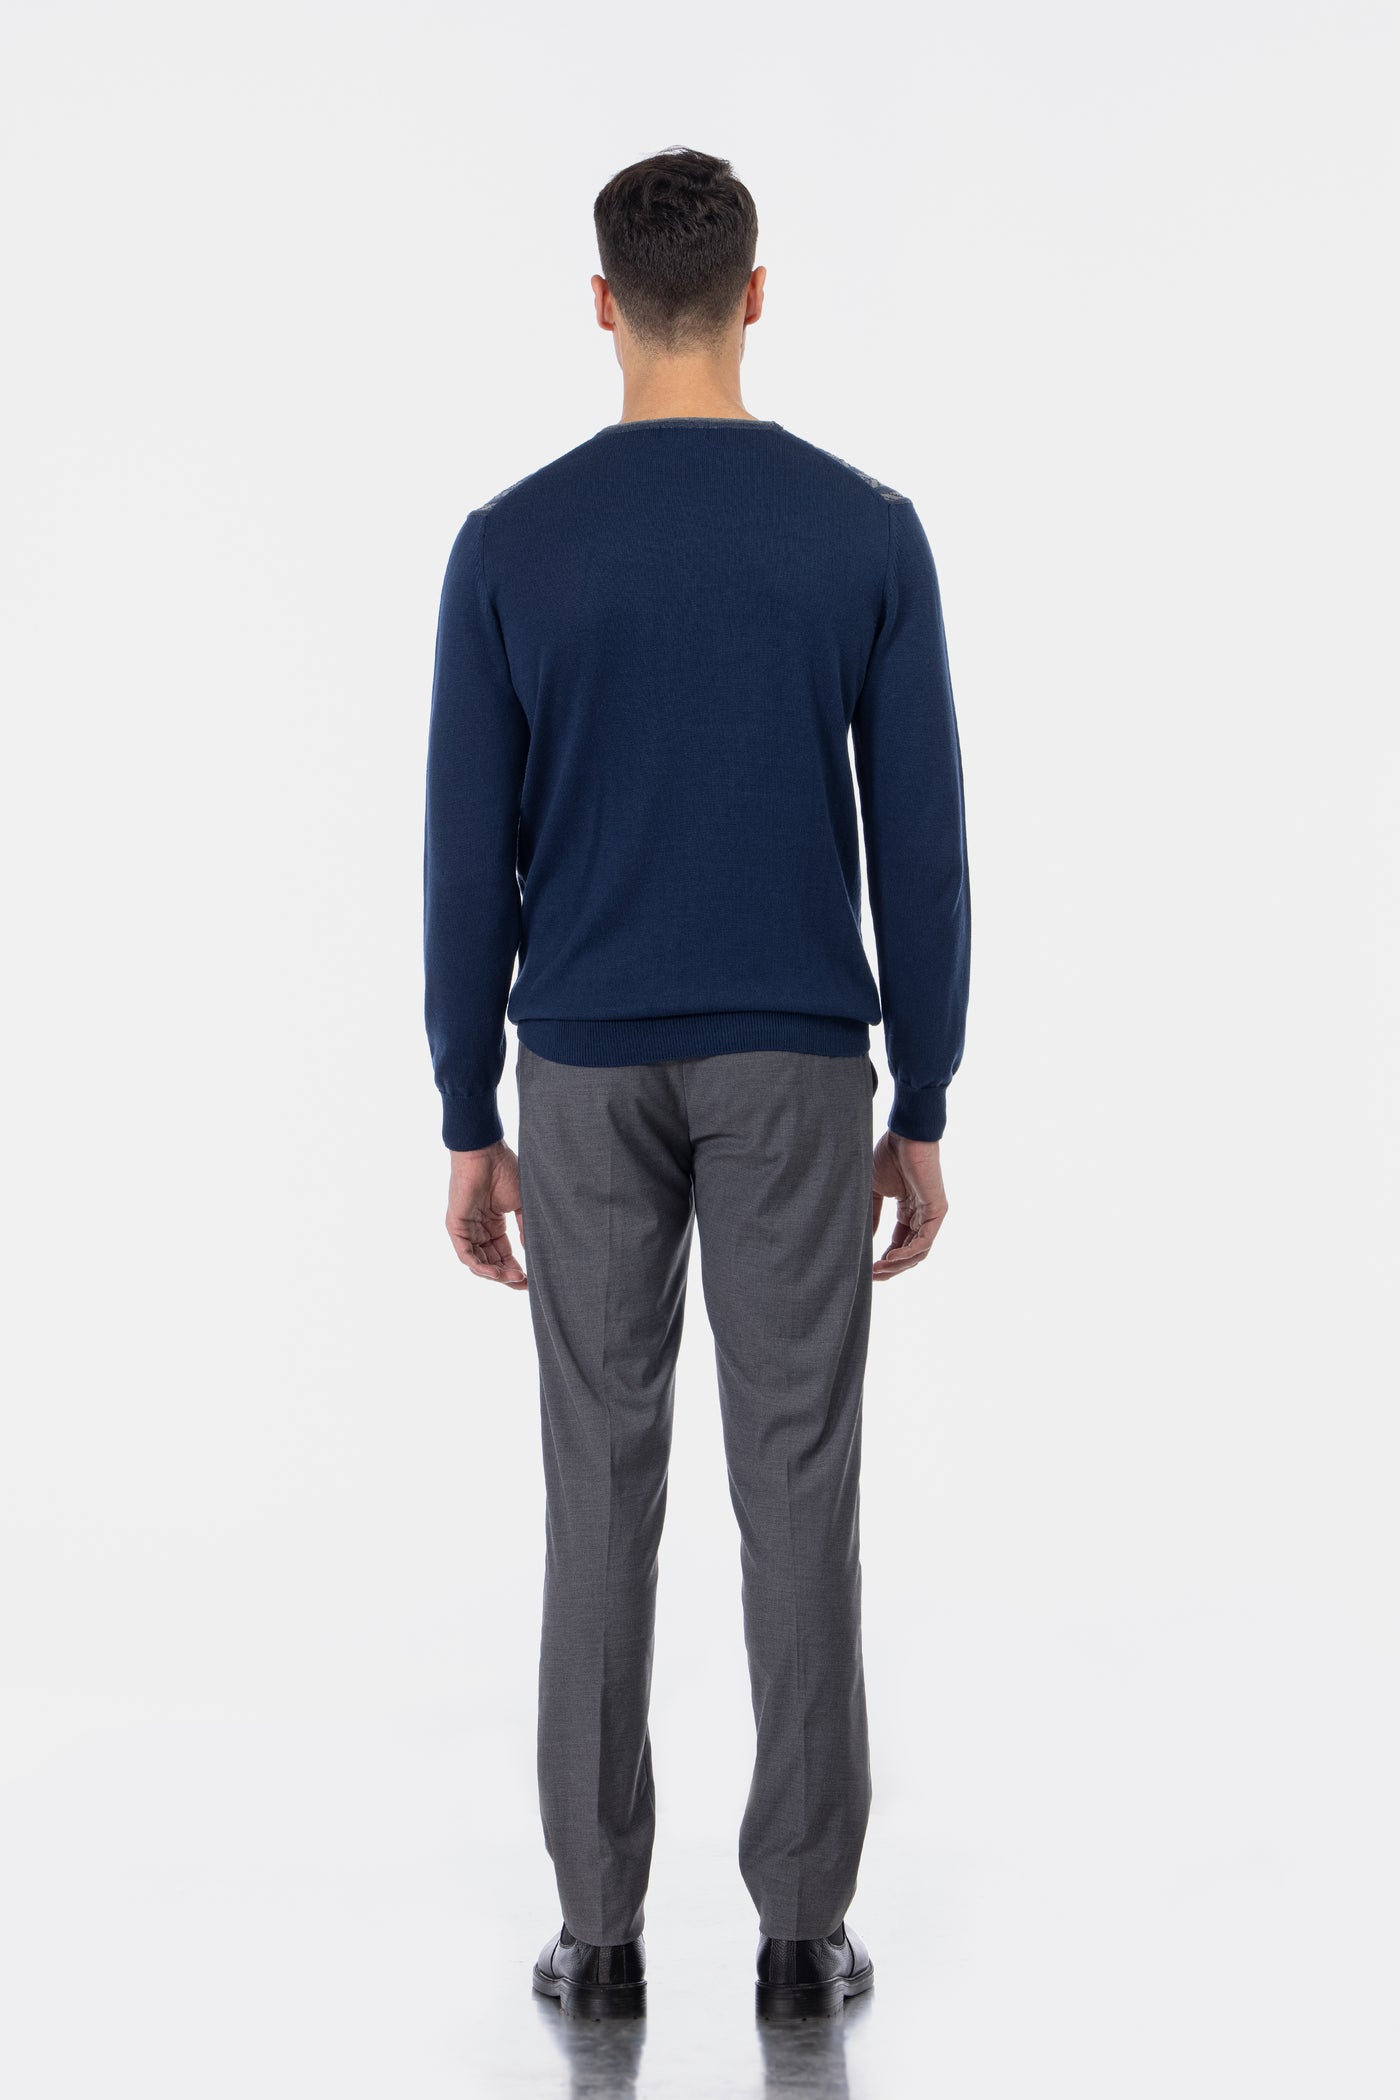 Jacquard Round Neck Navy and Silver Knitted Pullover